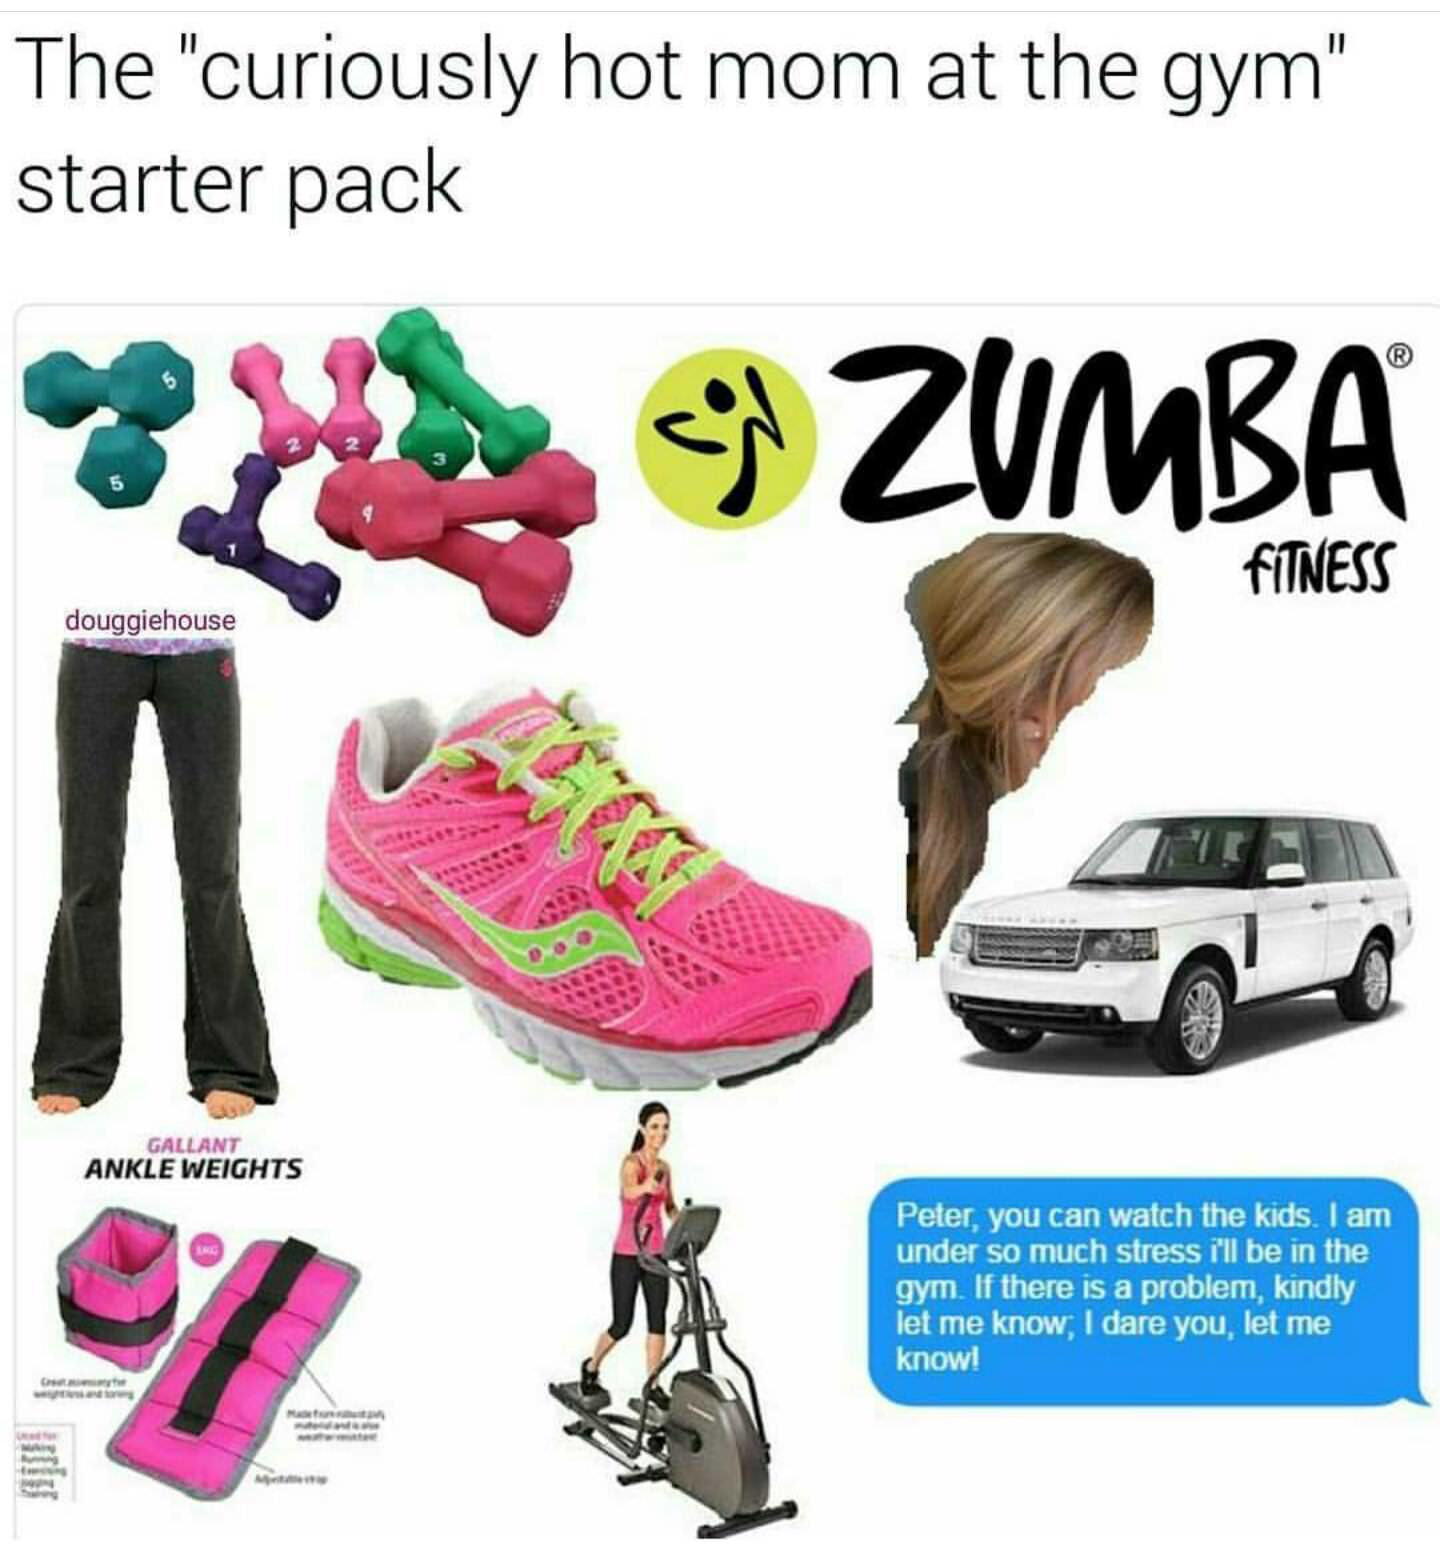 starter pack - hot mom starter pack - The "curiously hot mom at the gym" starter pack 9 Zumba Fitness douggiehouse Gallant Ankle Weights Peter, you can watch the kids. I am under so much stress i'll be in the gym. If there is a problem, kindly let me know